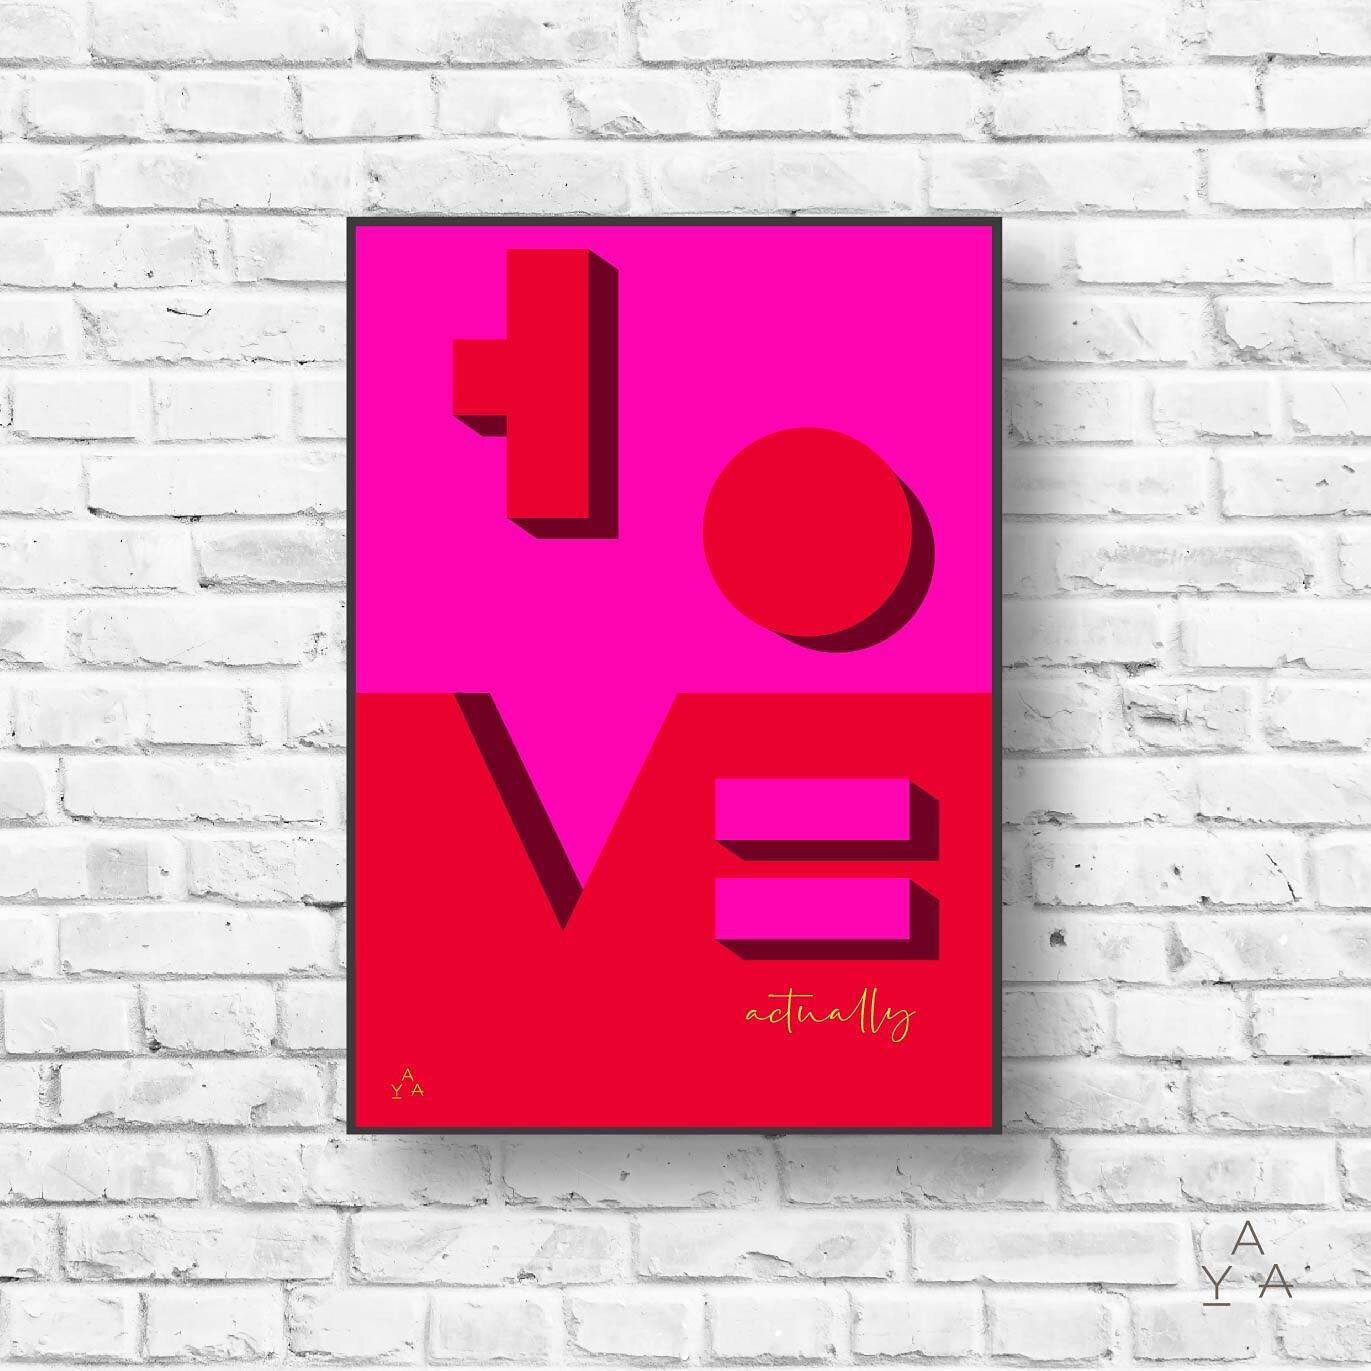 Hove Actually!! 
Happy Friday!! Playing with shapes and colour 💖❤️

Bright bold pops of colours &amp; graphic shapes...celebrating everything HOVE! 

#boldgraphic #boldcolours #posterdesign #red&amp;pink #hove #hoveactually #sussex #eastsussex #grap